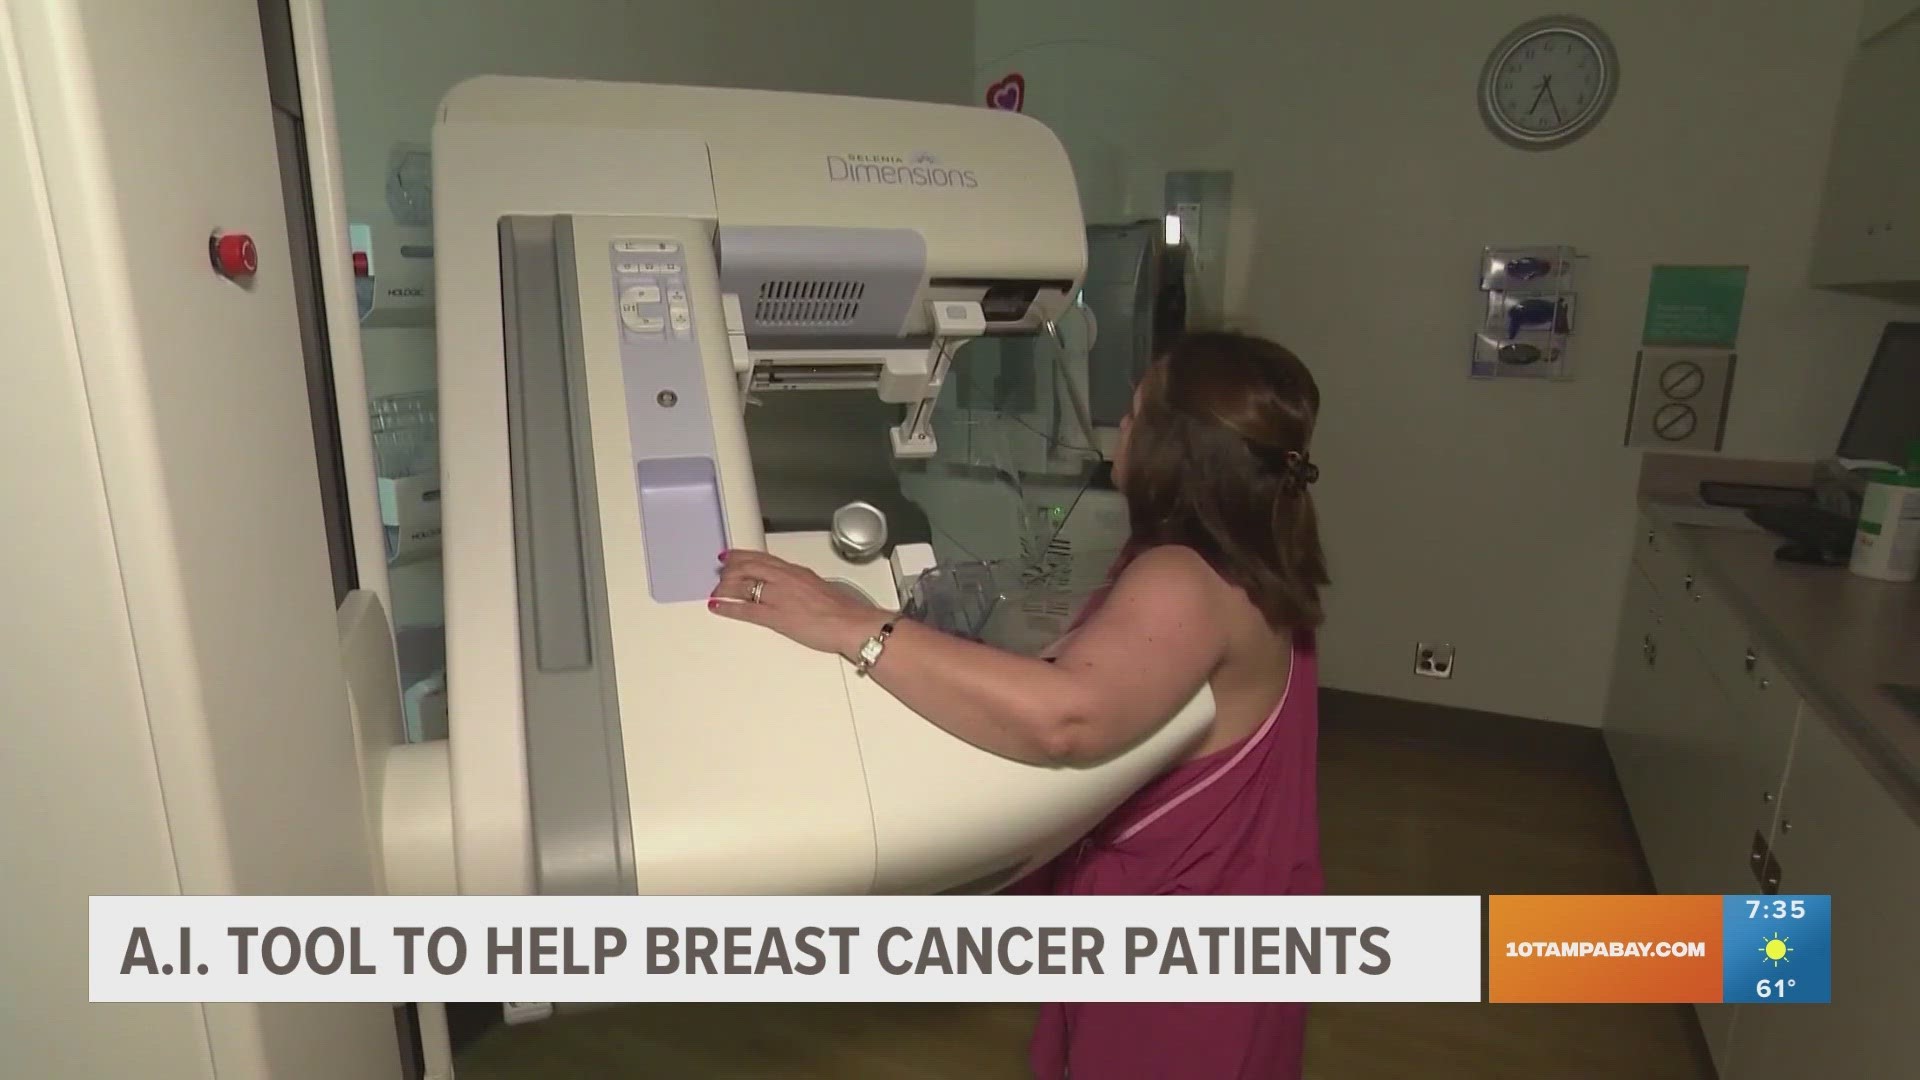 A team of researchers has developed a new artificial intelligence tool to help breast cancer patients and their doctors make better treatment choices.